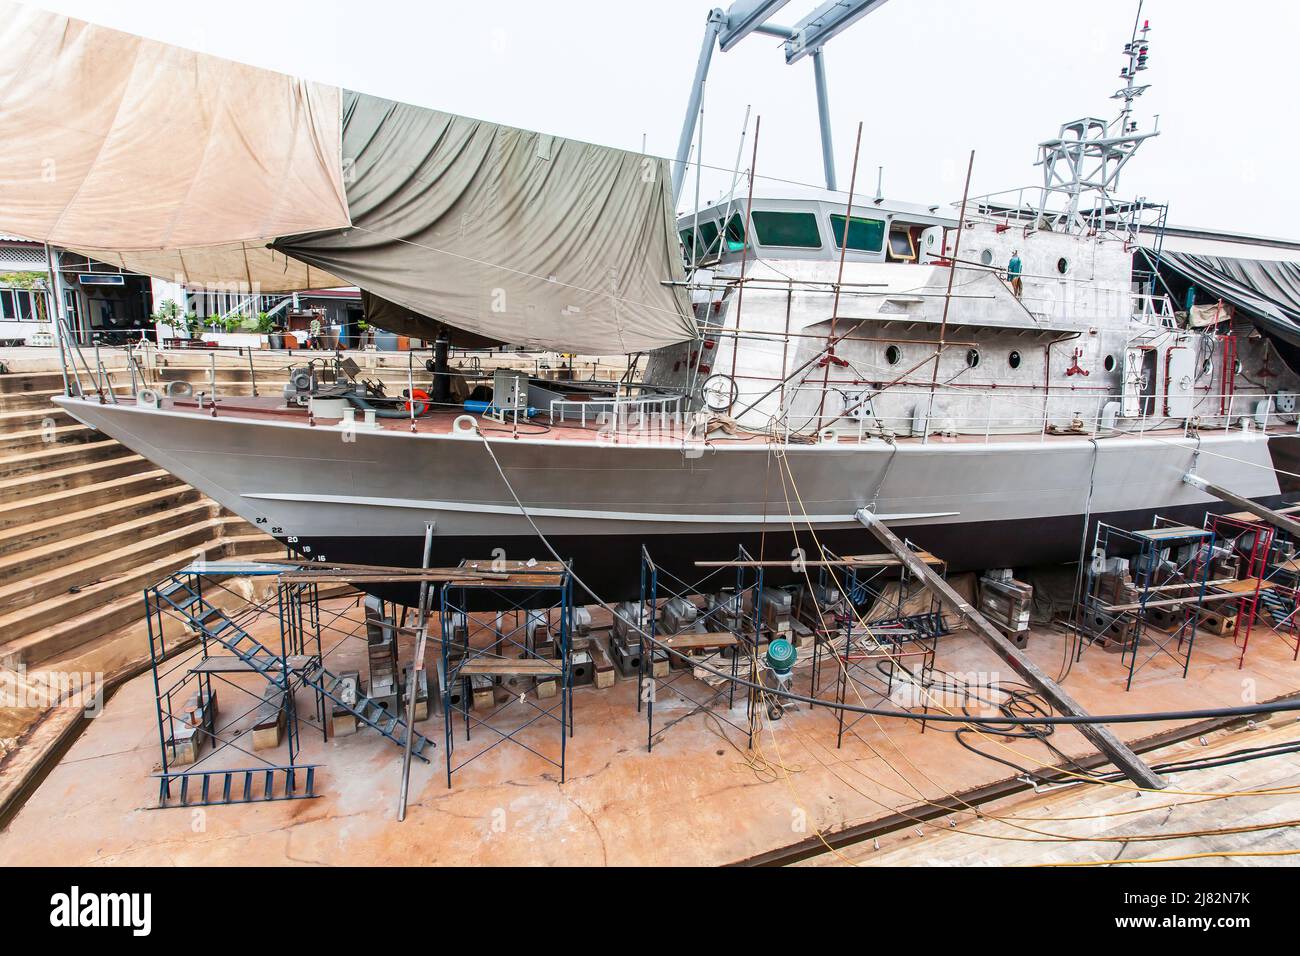 A patrol vessel or military vessel building in a dry dock at a naval shipyard. Stock Photo